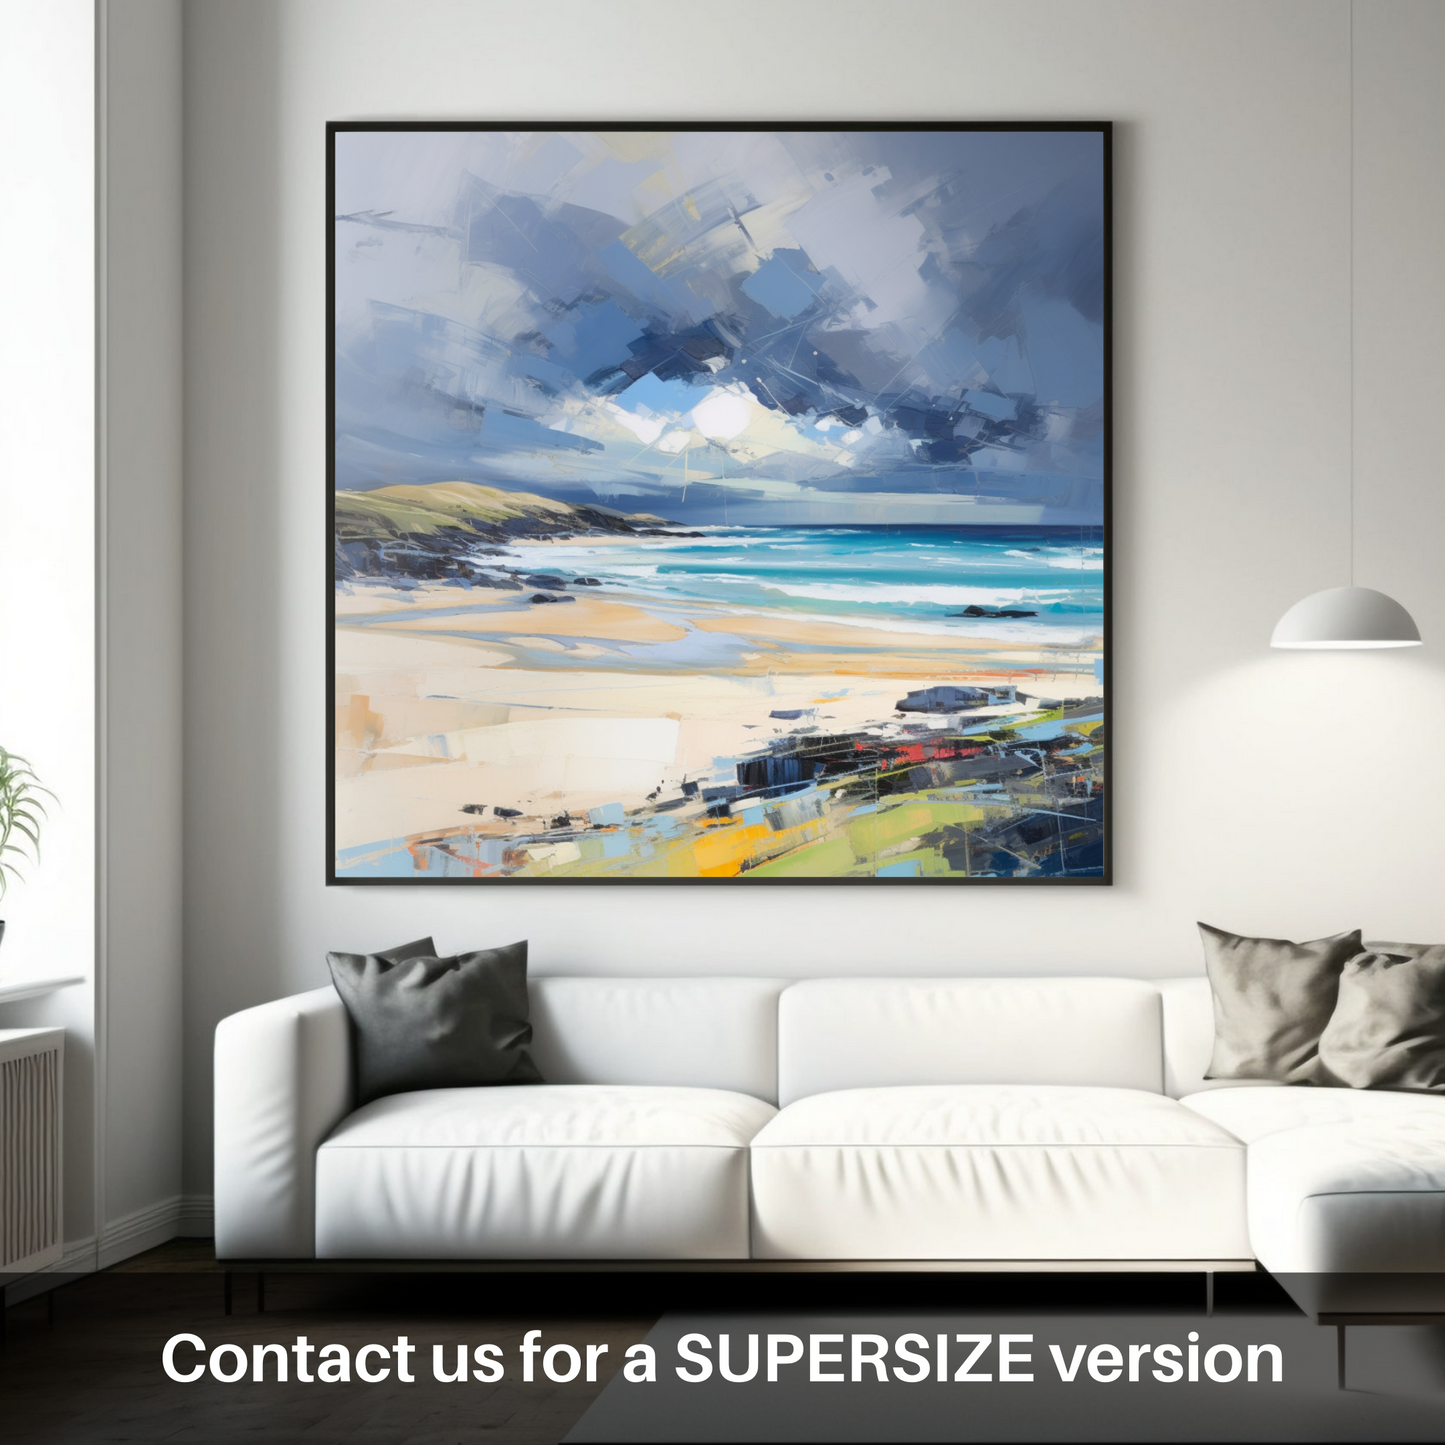 Huge supersize print of Scarista Beach with a stormy sky